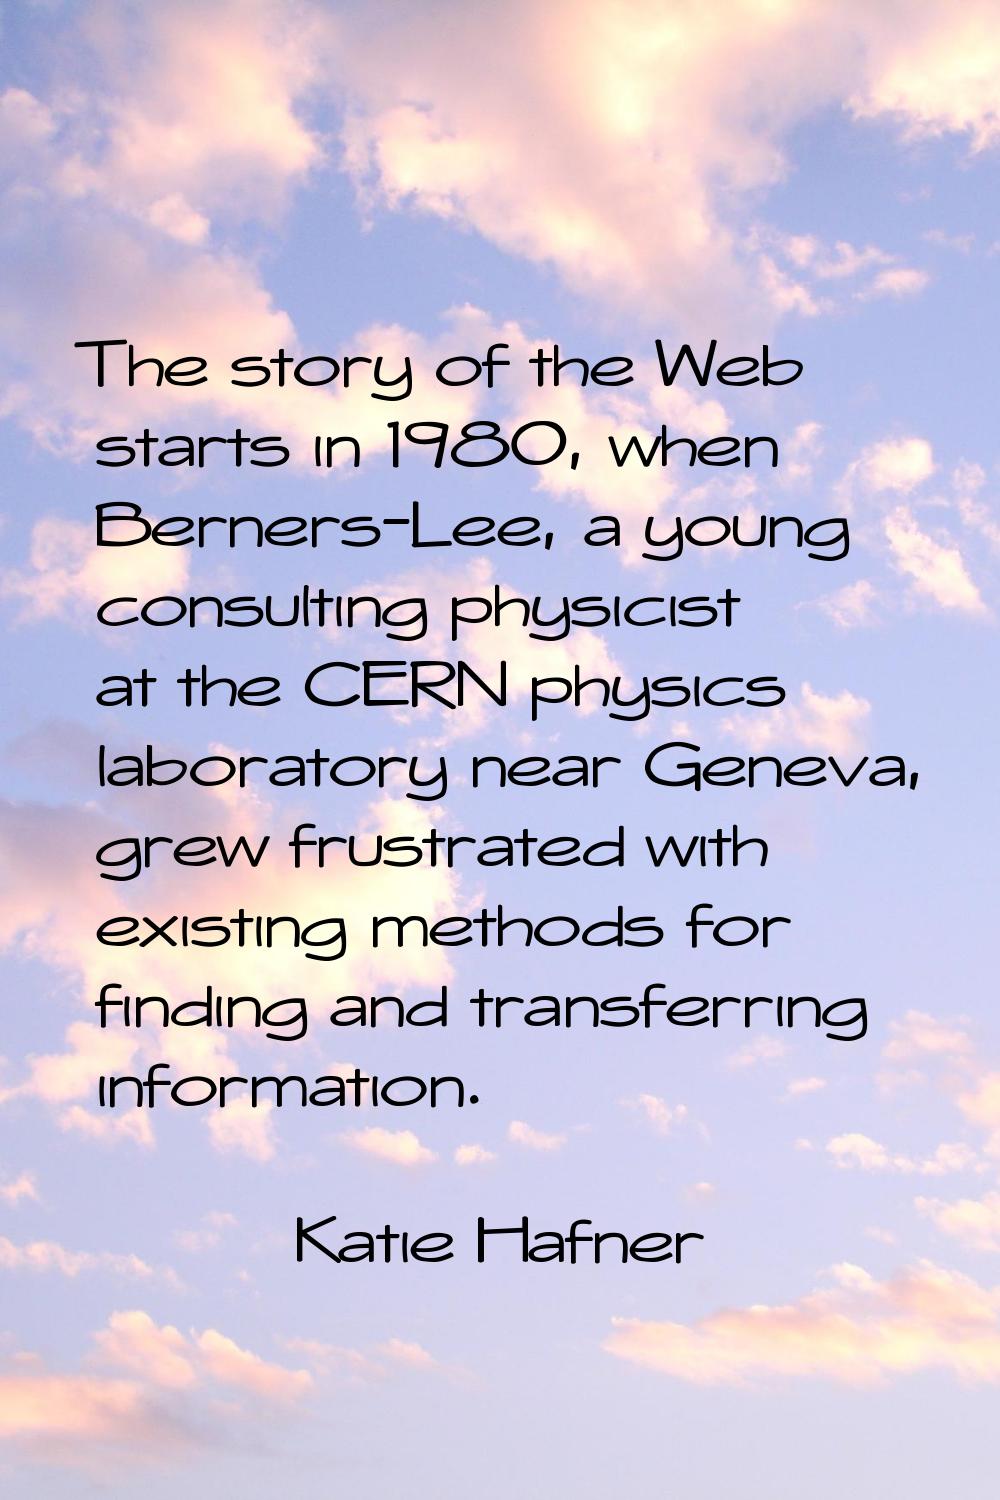 The story of the Web starts in 1980, when Berners-Lee, a young consulting physicist at the CERN phy